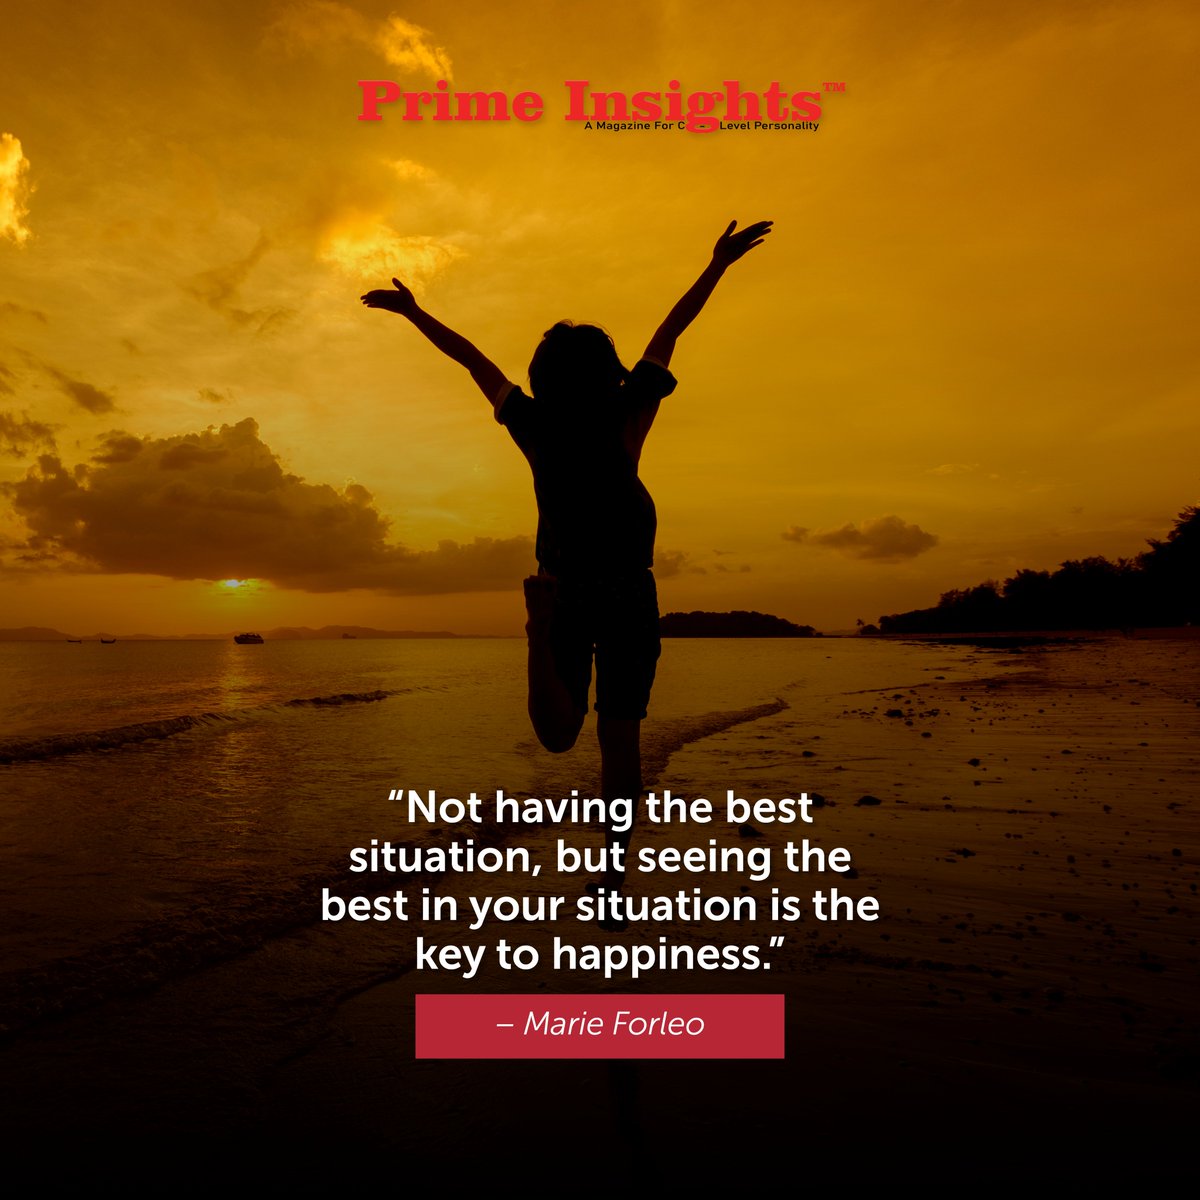 'Not having the best situation, but seeing the best in your situation is the key to happiness.'
– Marie Forleo

primeinsights.in

#success #quoteoftheday #quoteoftheweek #successquotes #successgoals #quotesforsuccess #inspirationalquotes #motivationalquotes #inspiring